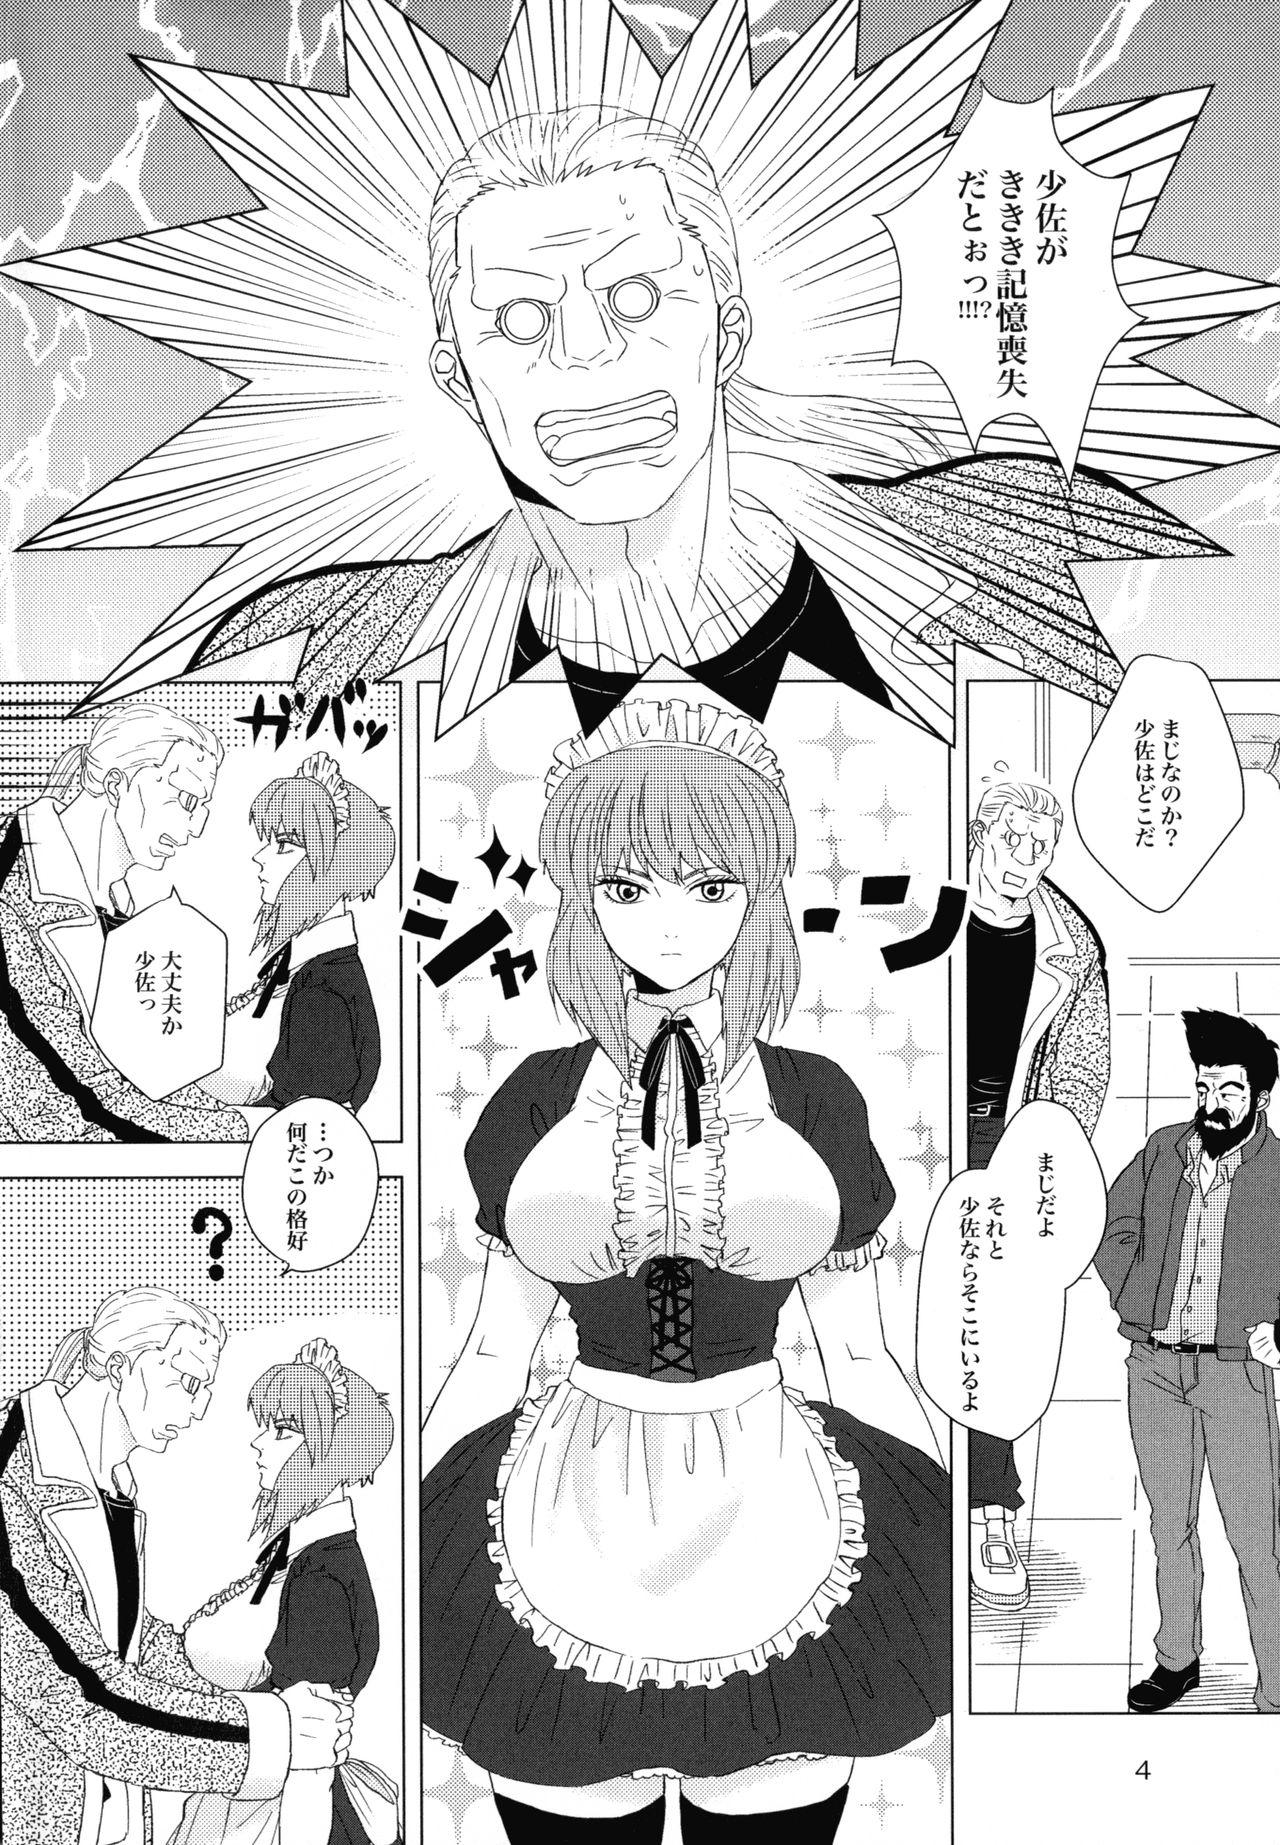 Brother FRENCHMAIDCOSTUME BTMT - Ghost in the shell Firsttime - Page 4